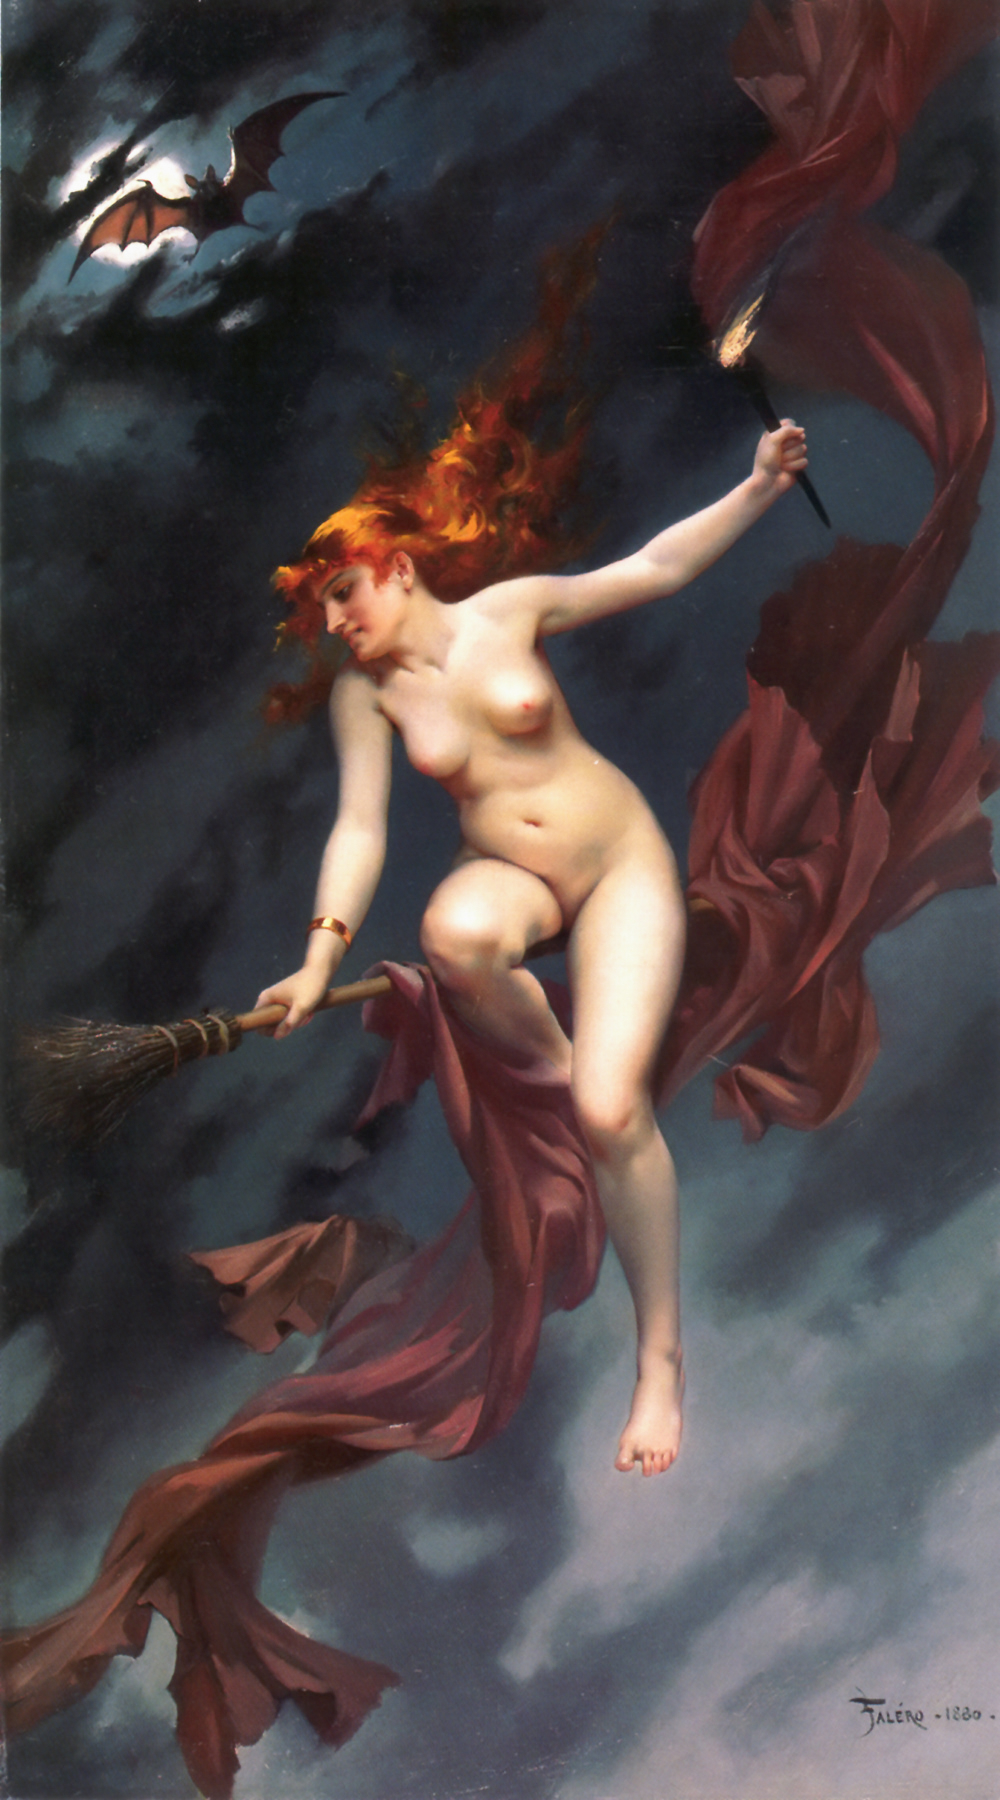 Some believe that belladonna and its close relatives were the cause of our notions of witches flying through the air on broomsticks. Image source: Luis Ricardo Falero, Public domain, via Wikimedia Commons